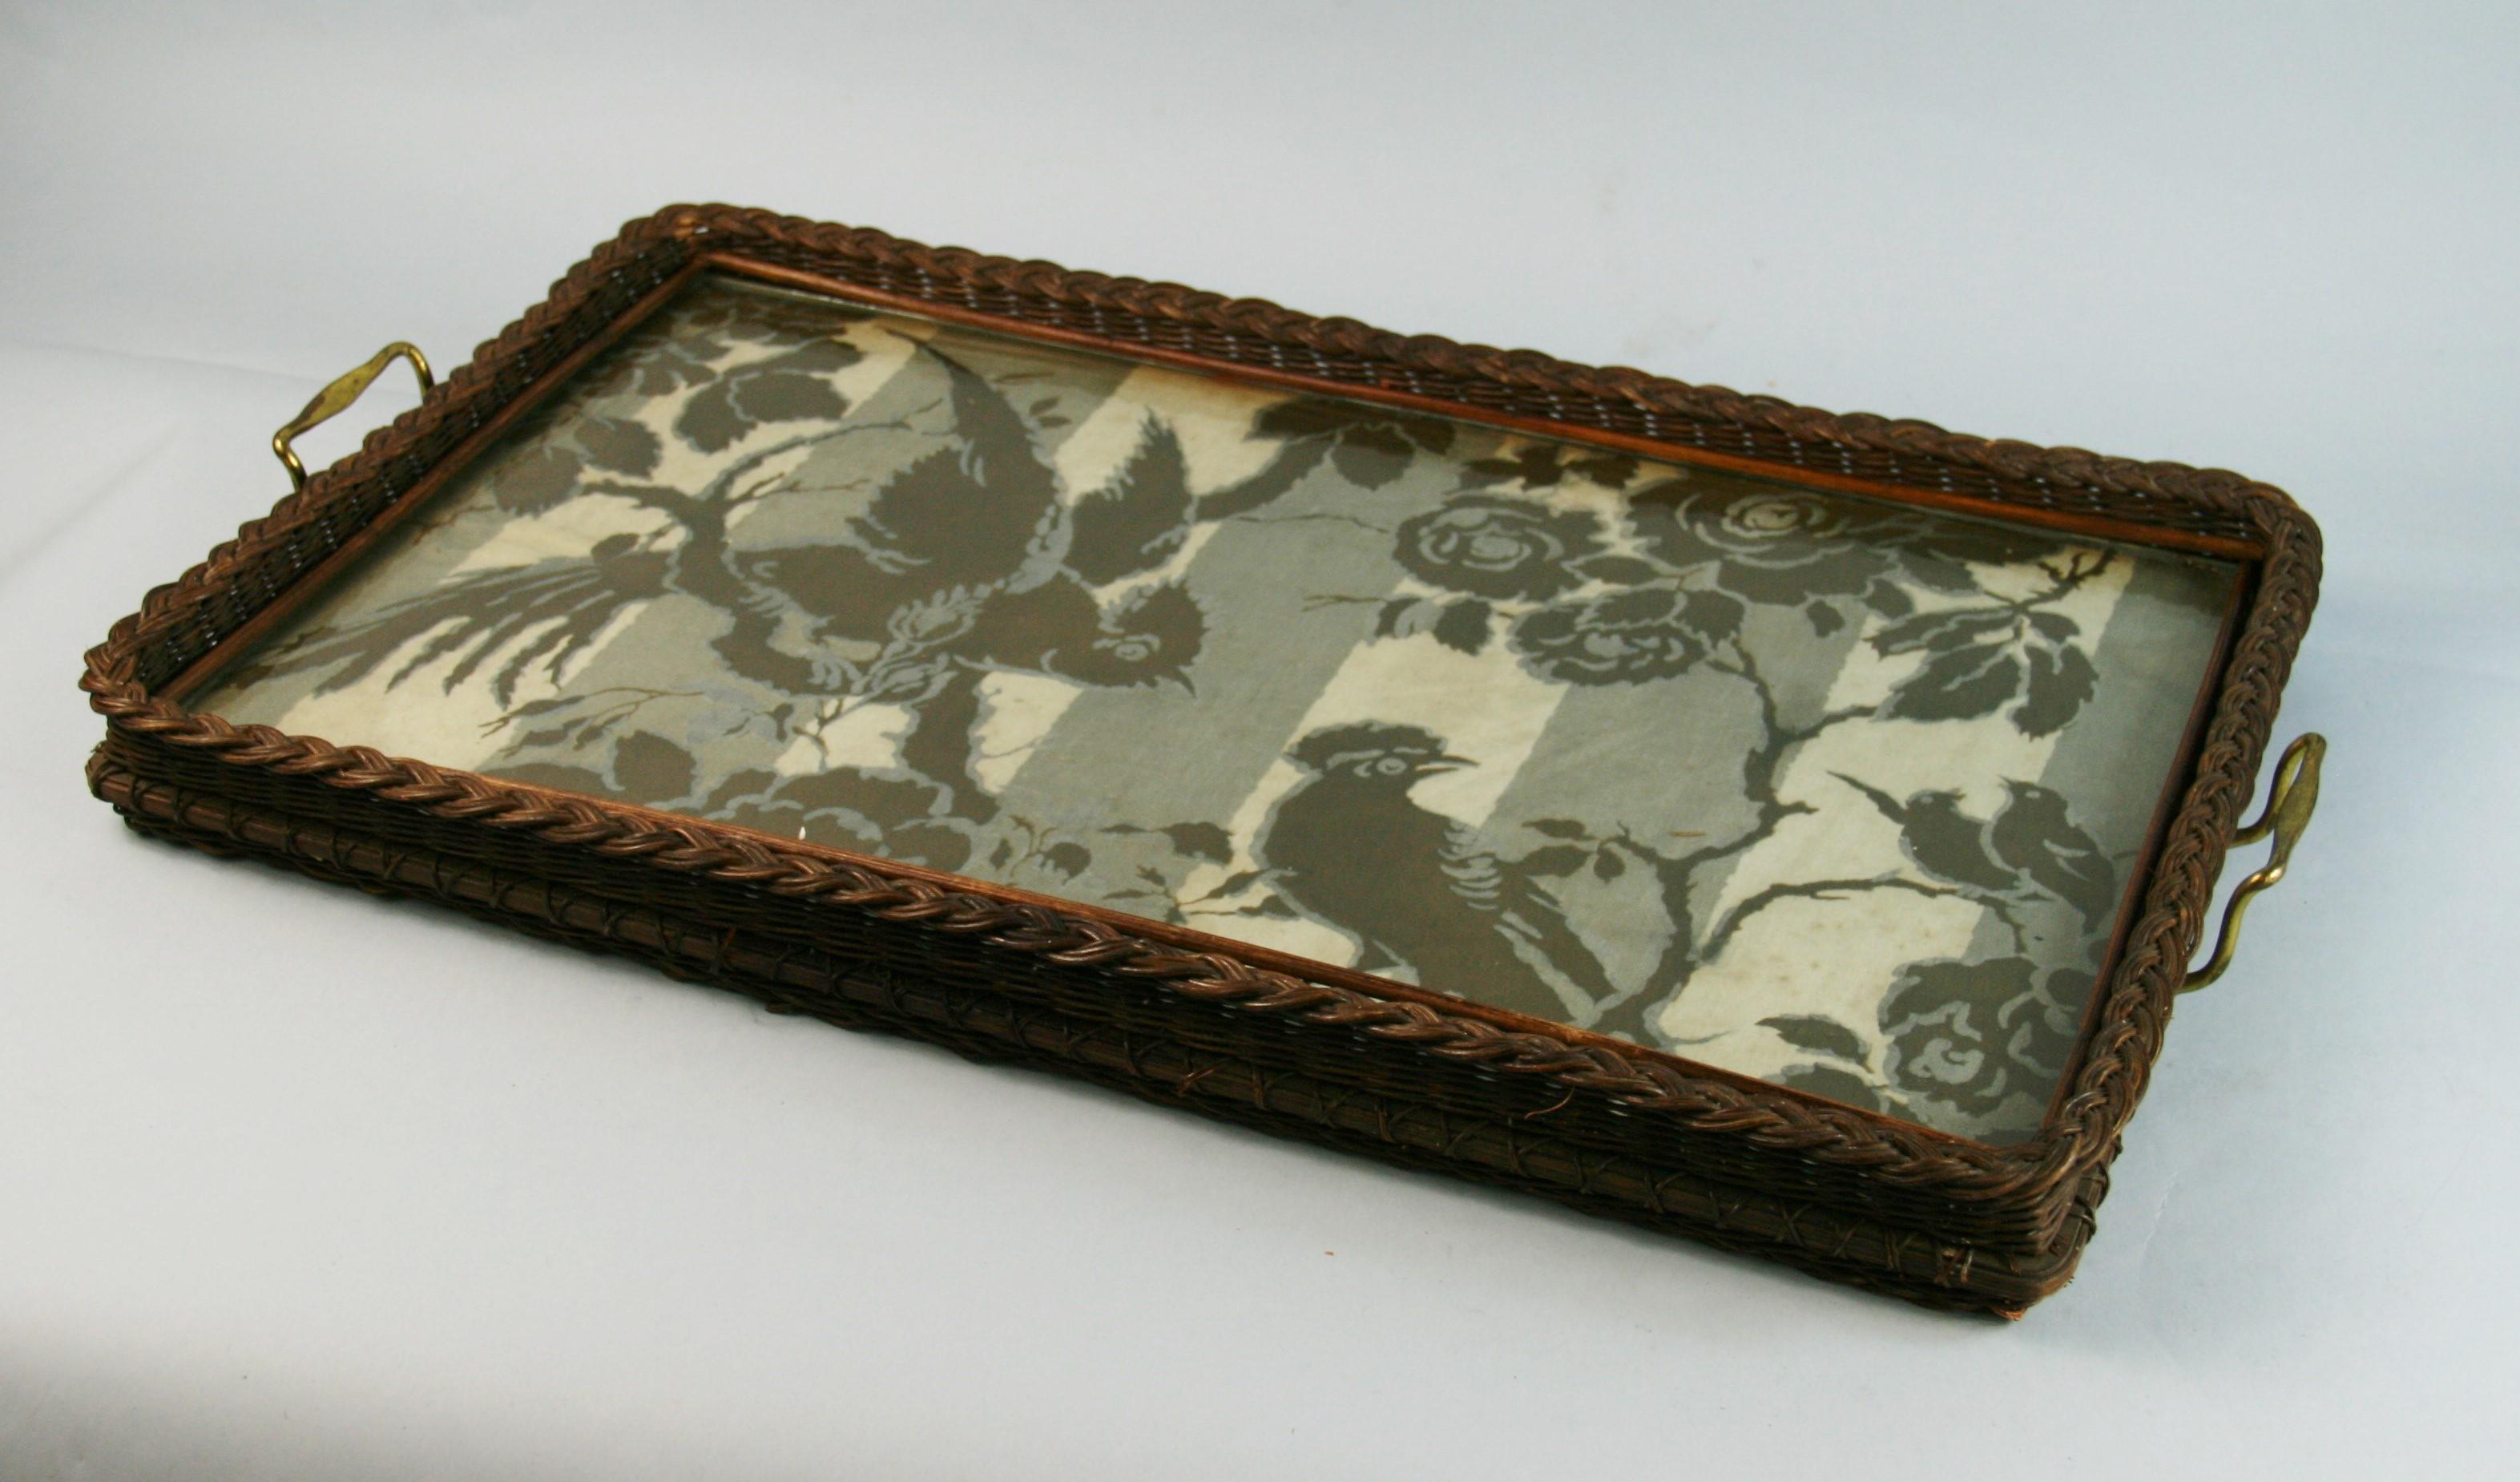 3-654 Wicker and brass serving tray with fabric under glass surface.